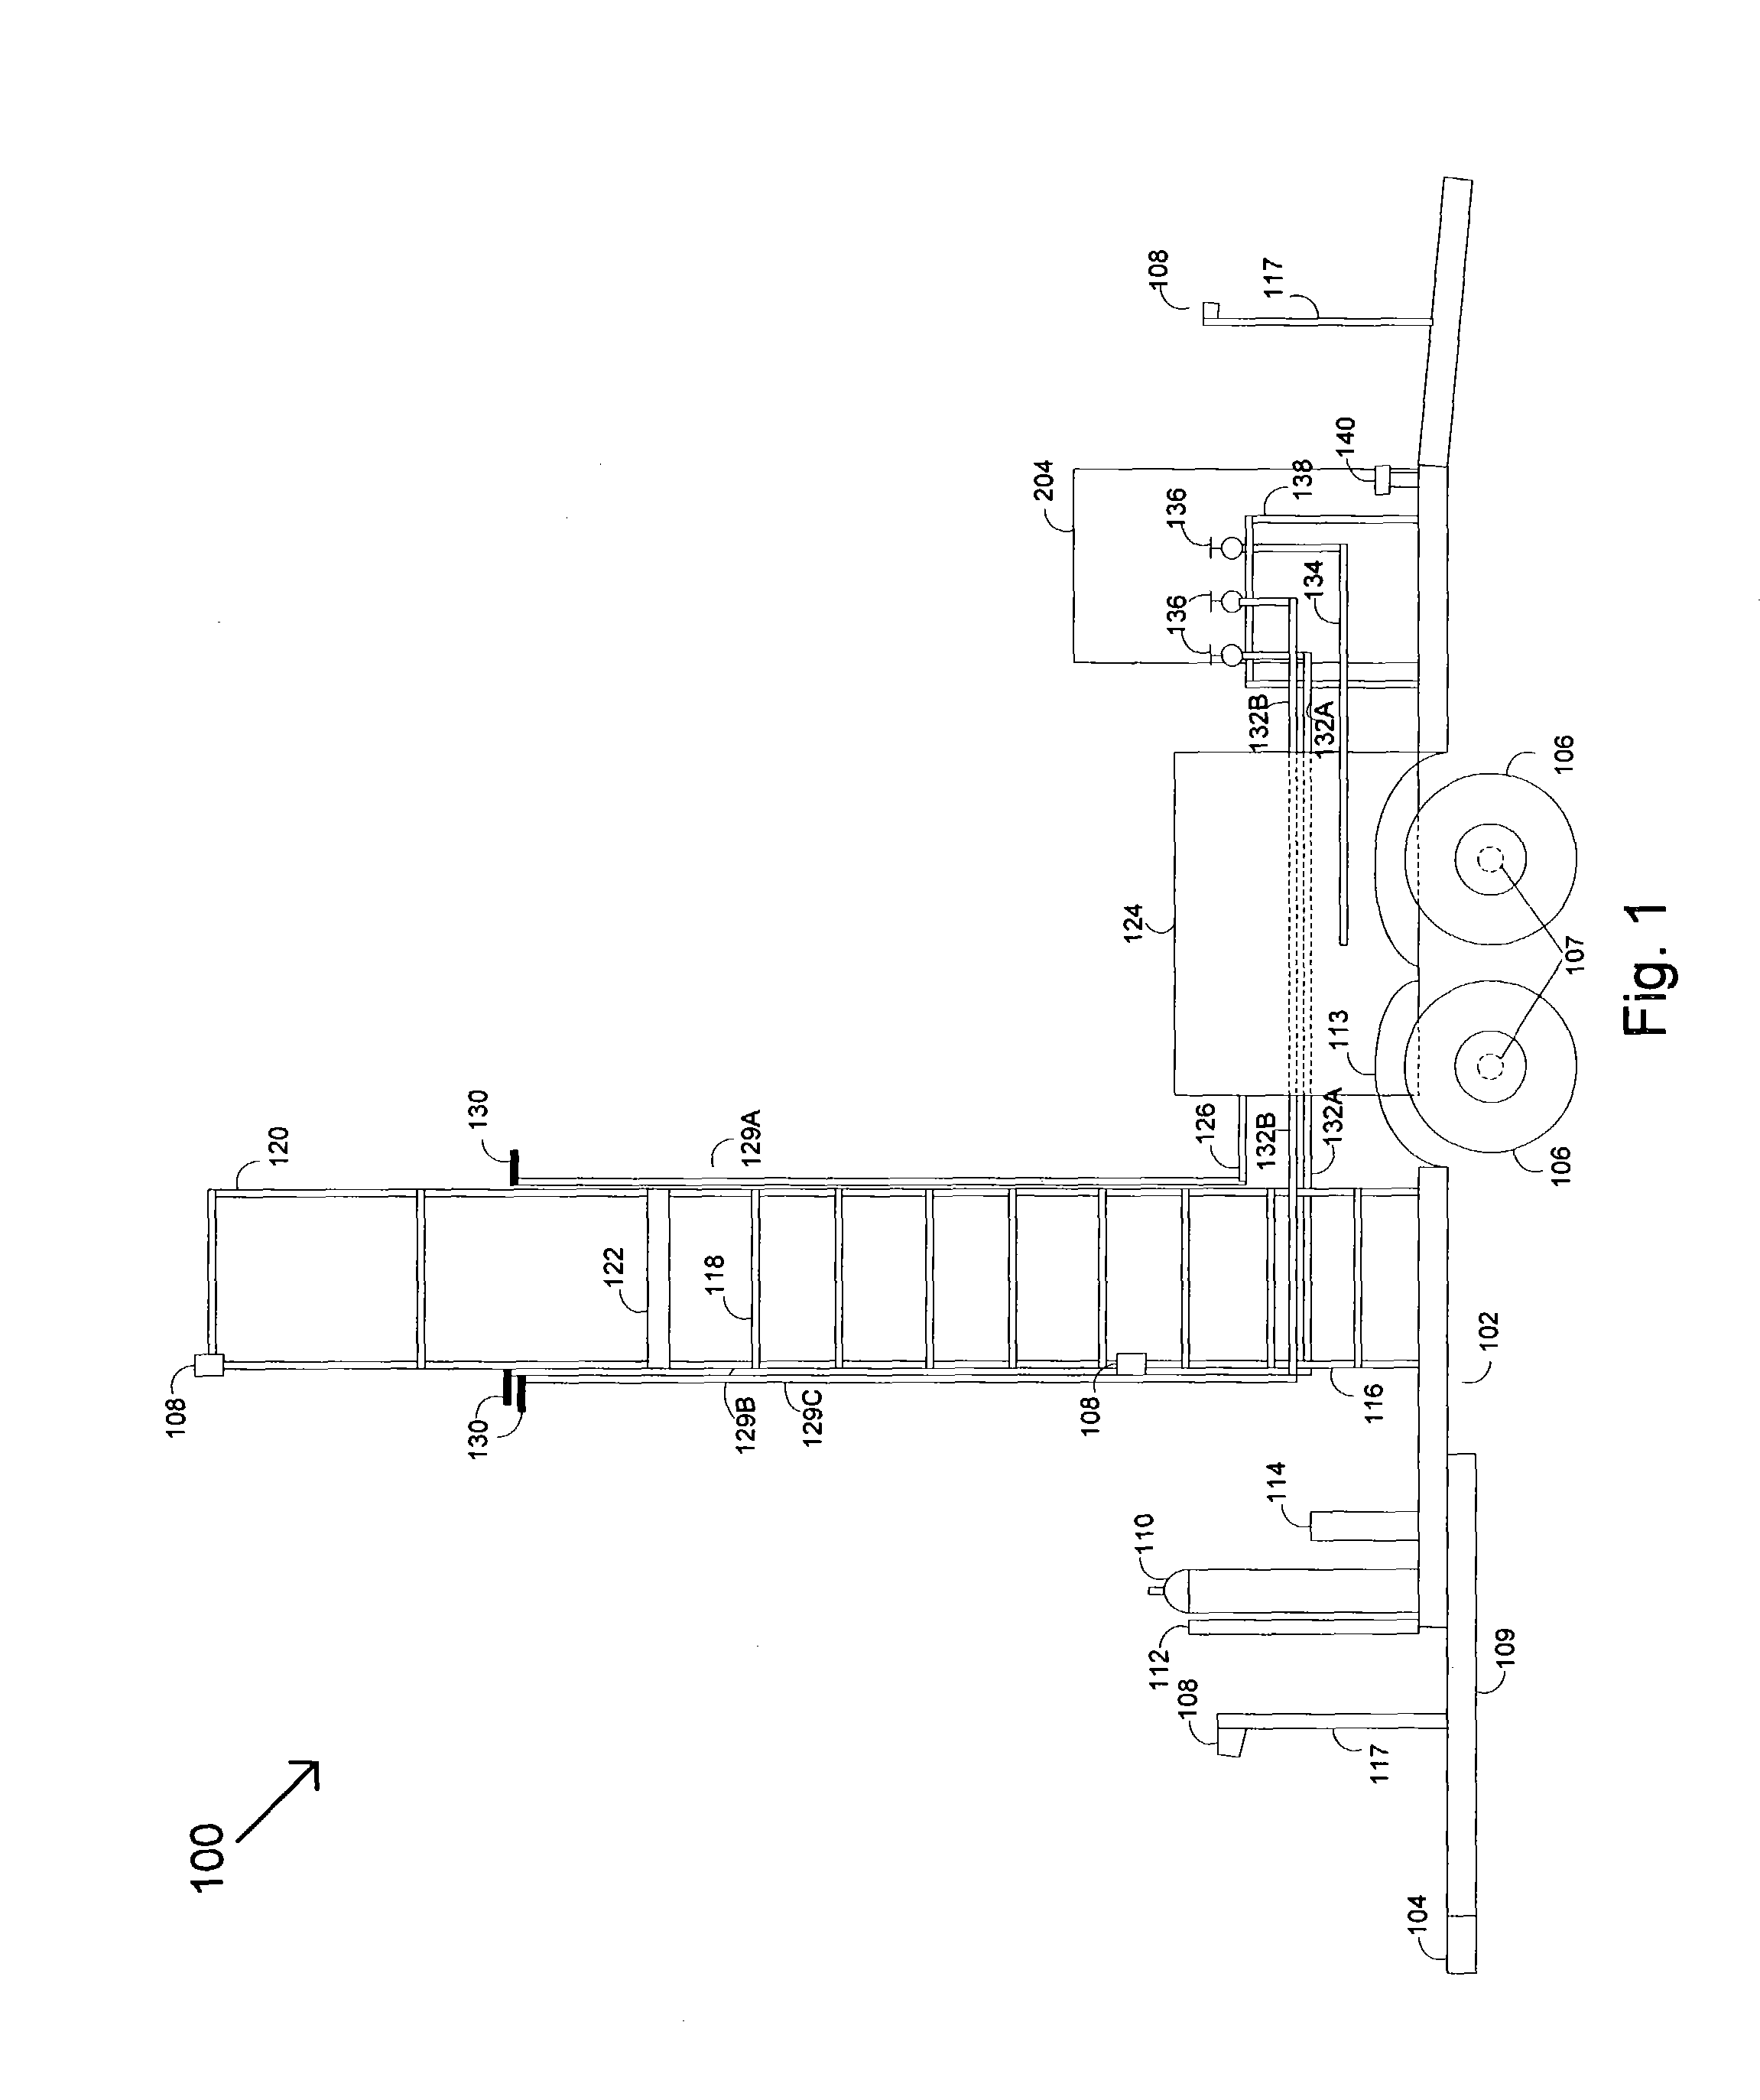 Method and apparatus for loading and unloading material from a storage medium